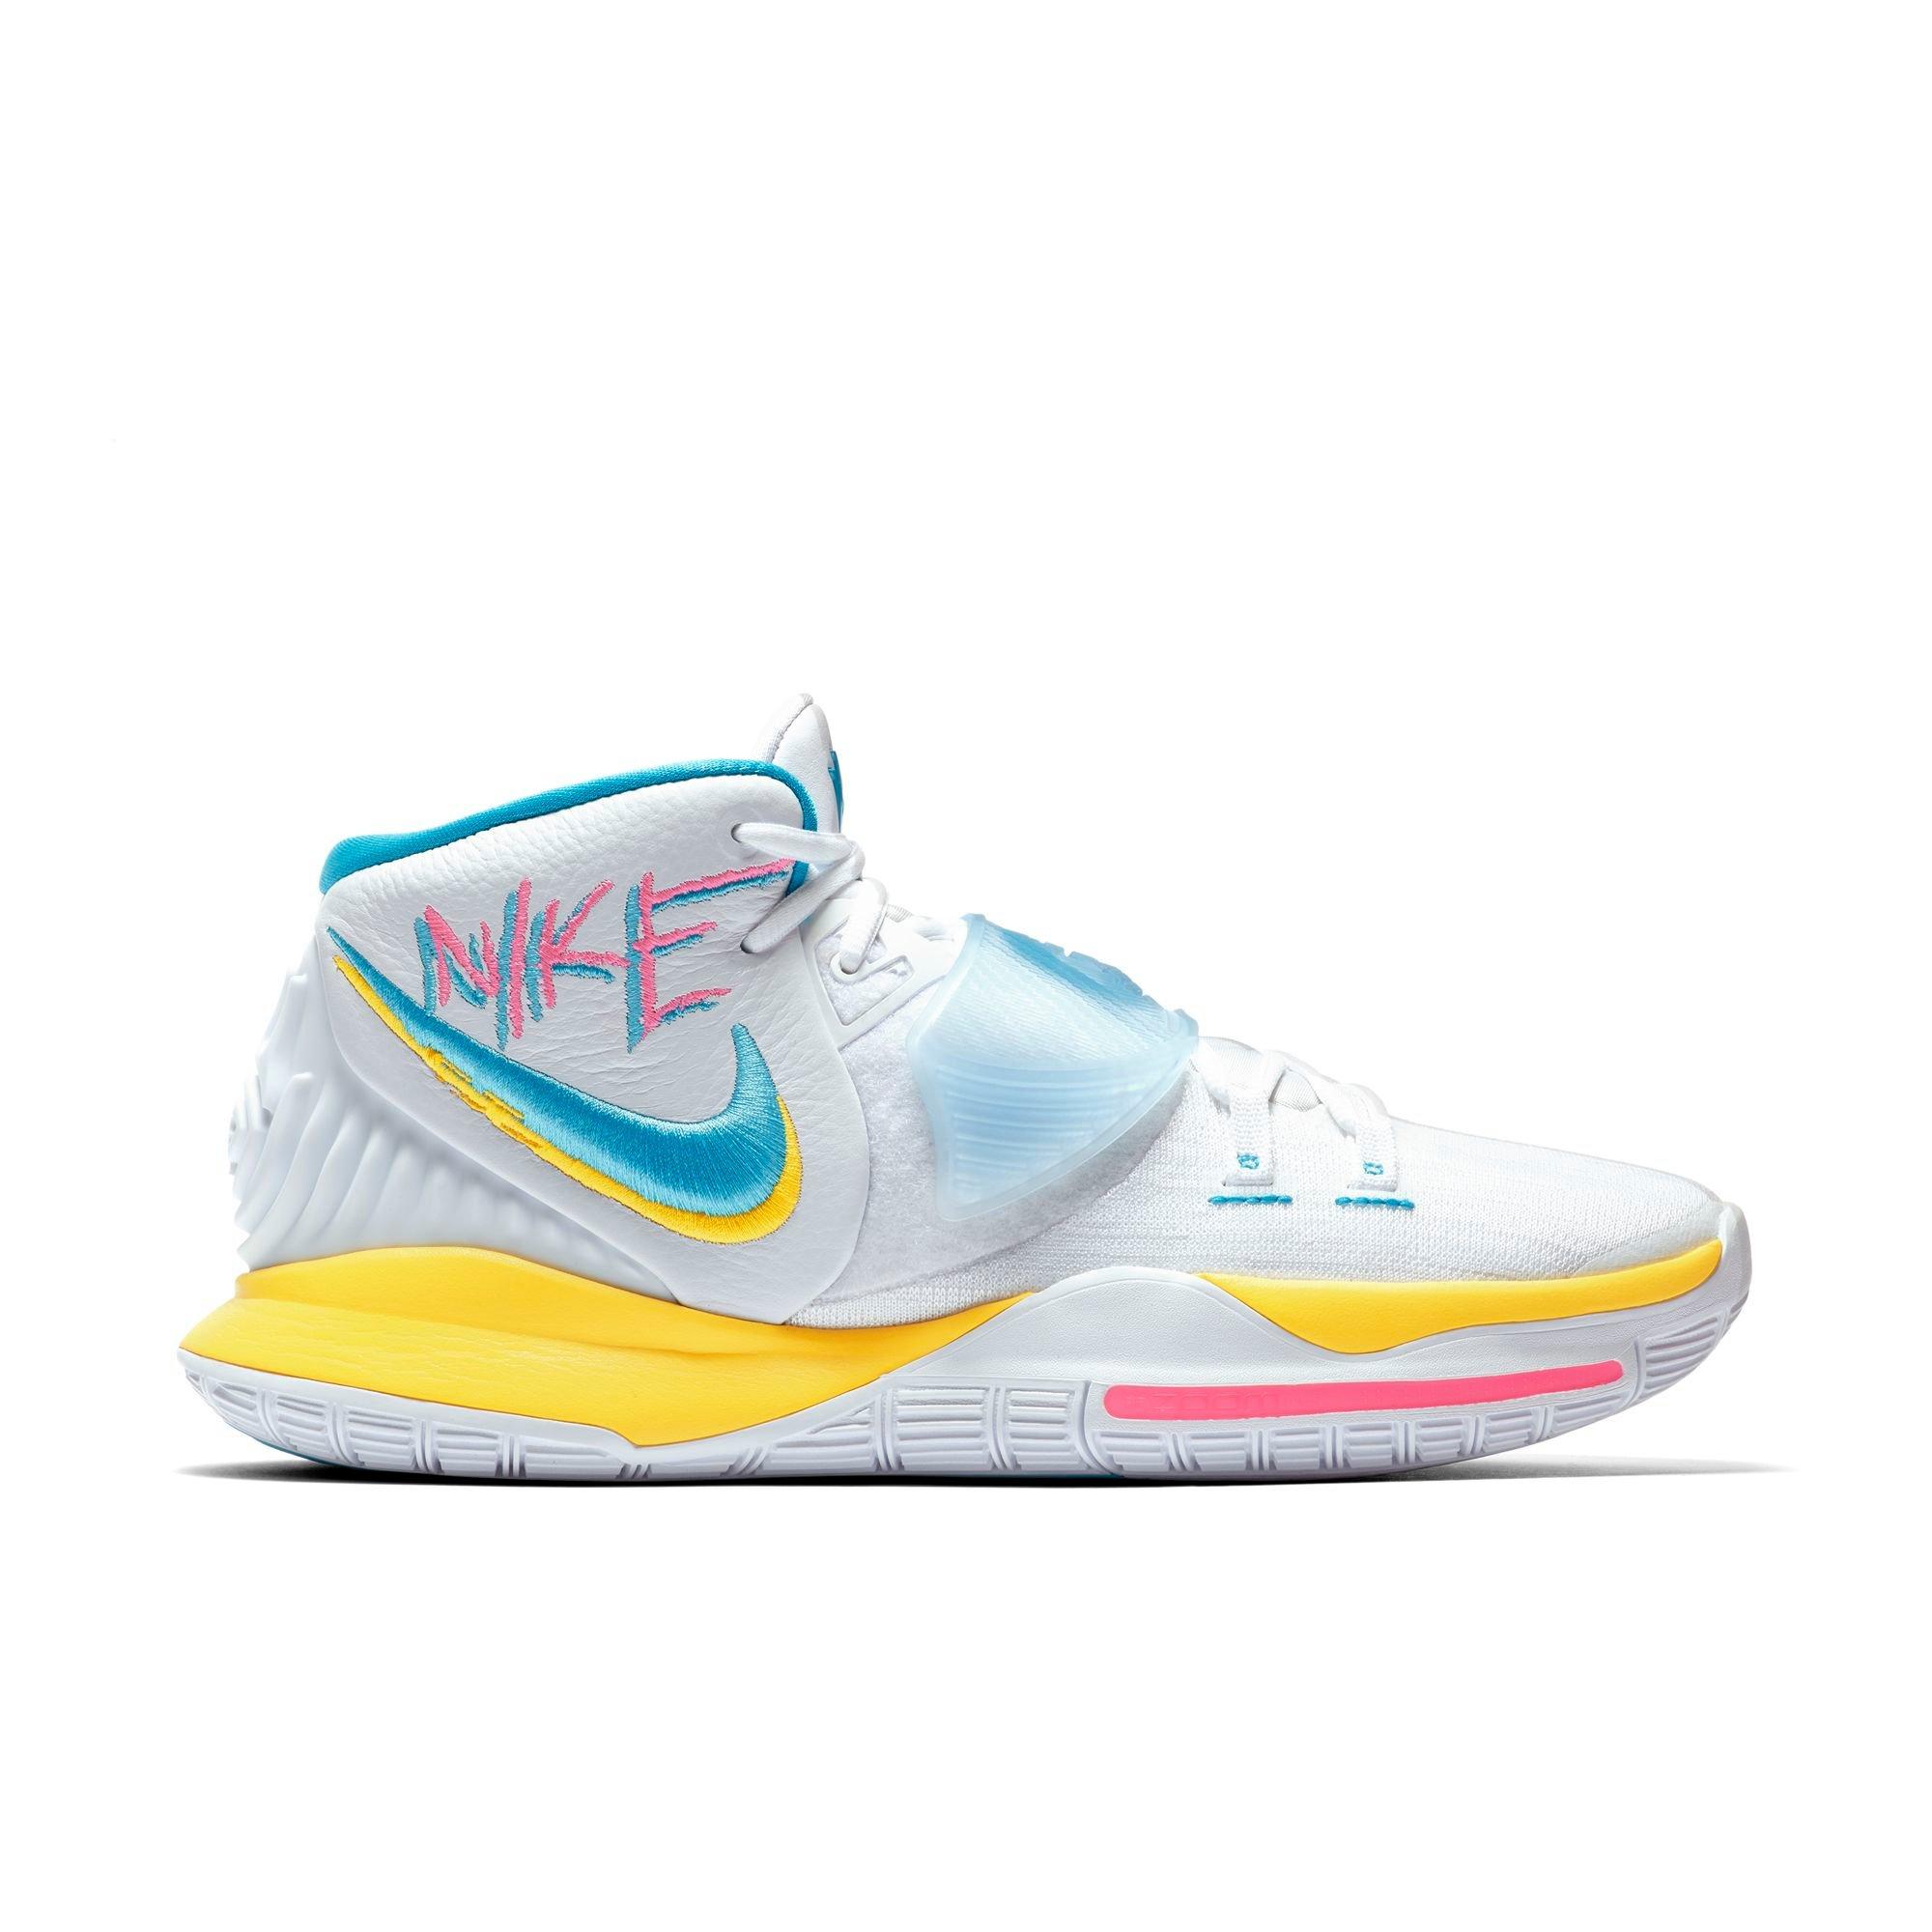 Buy Nike Kyrie 6 Enlightenment Basketball Shoes 24Segons